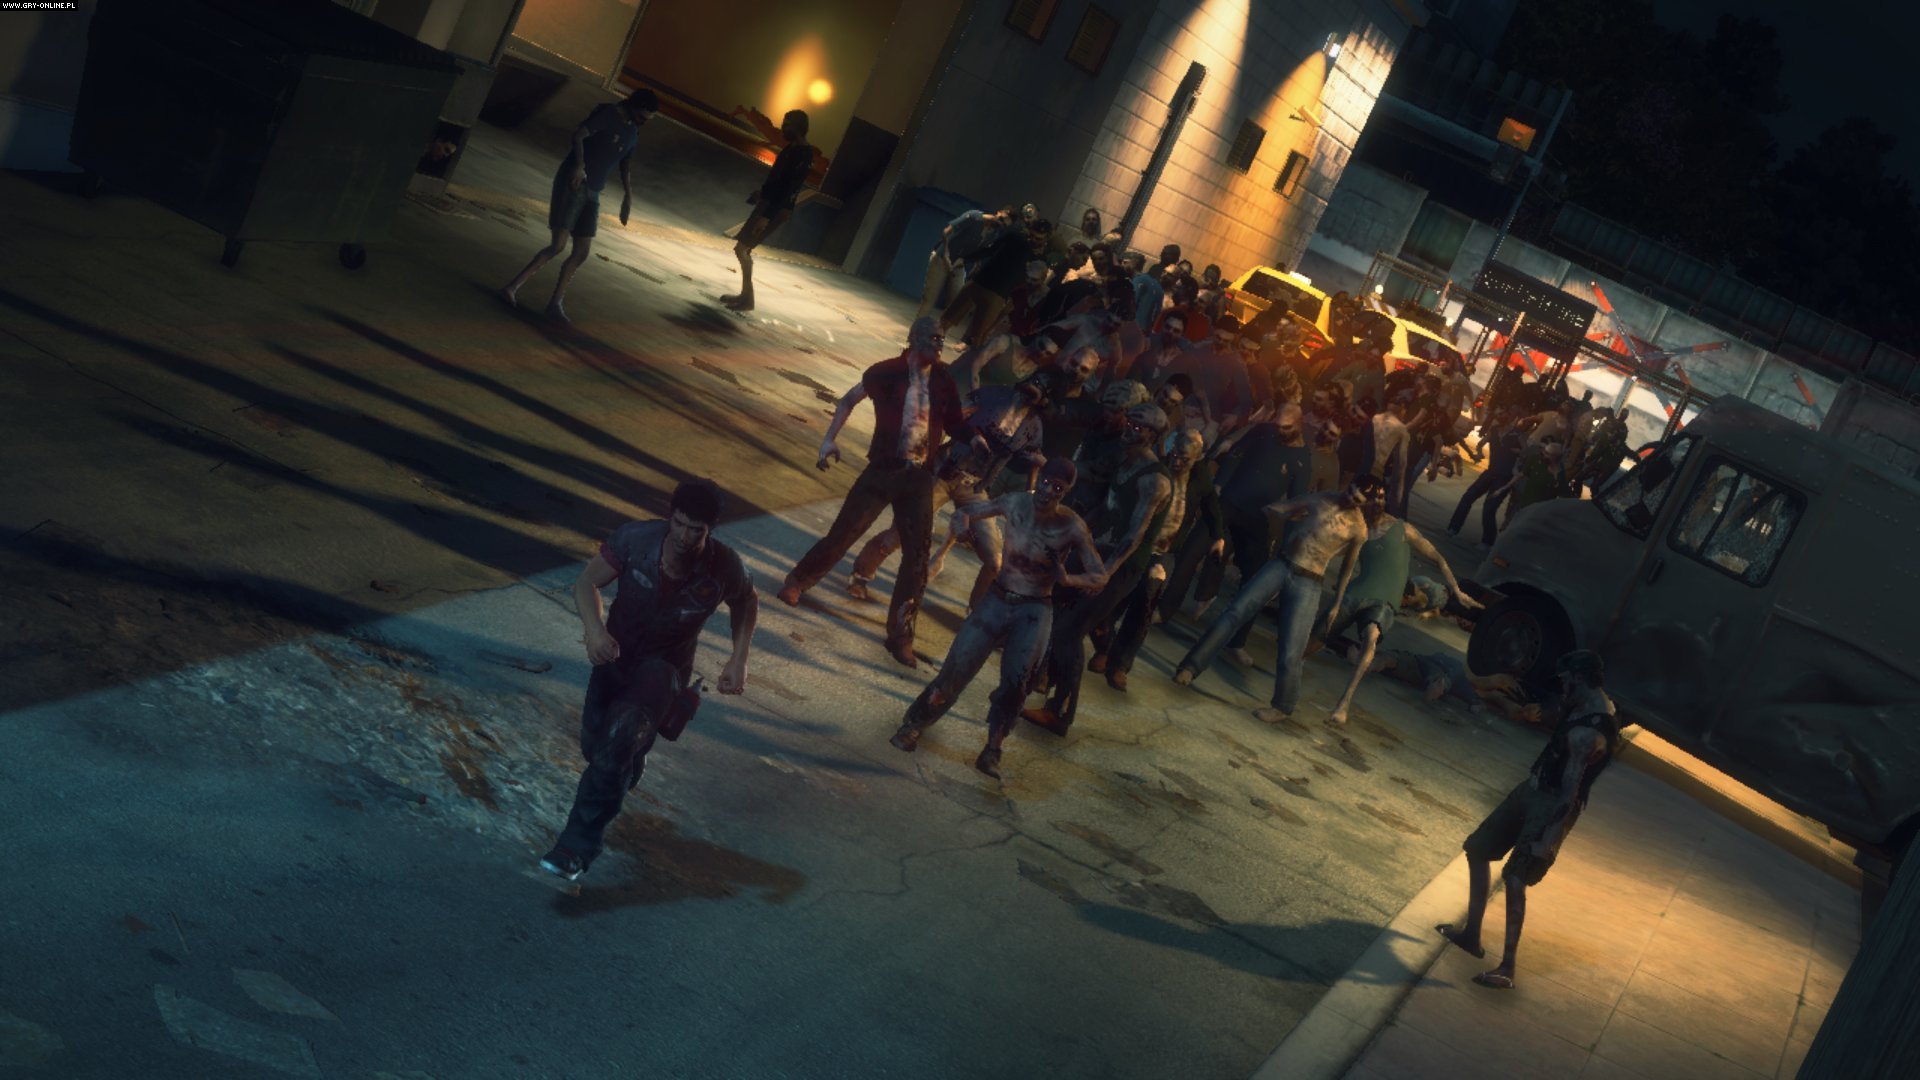 Video Game Dead Rising 3 HD Wallpaper | Background Image